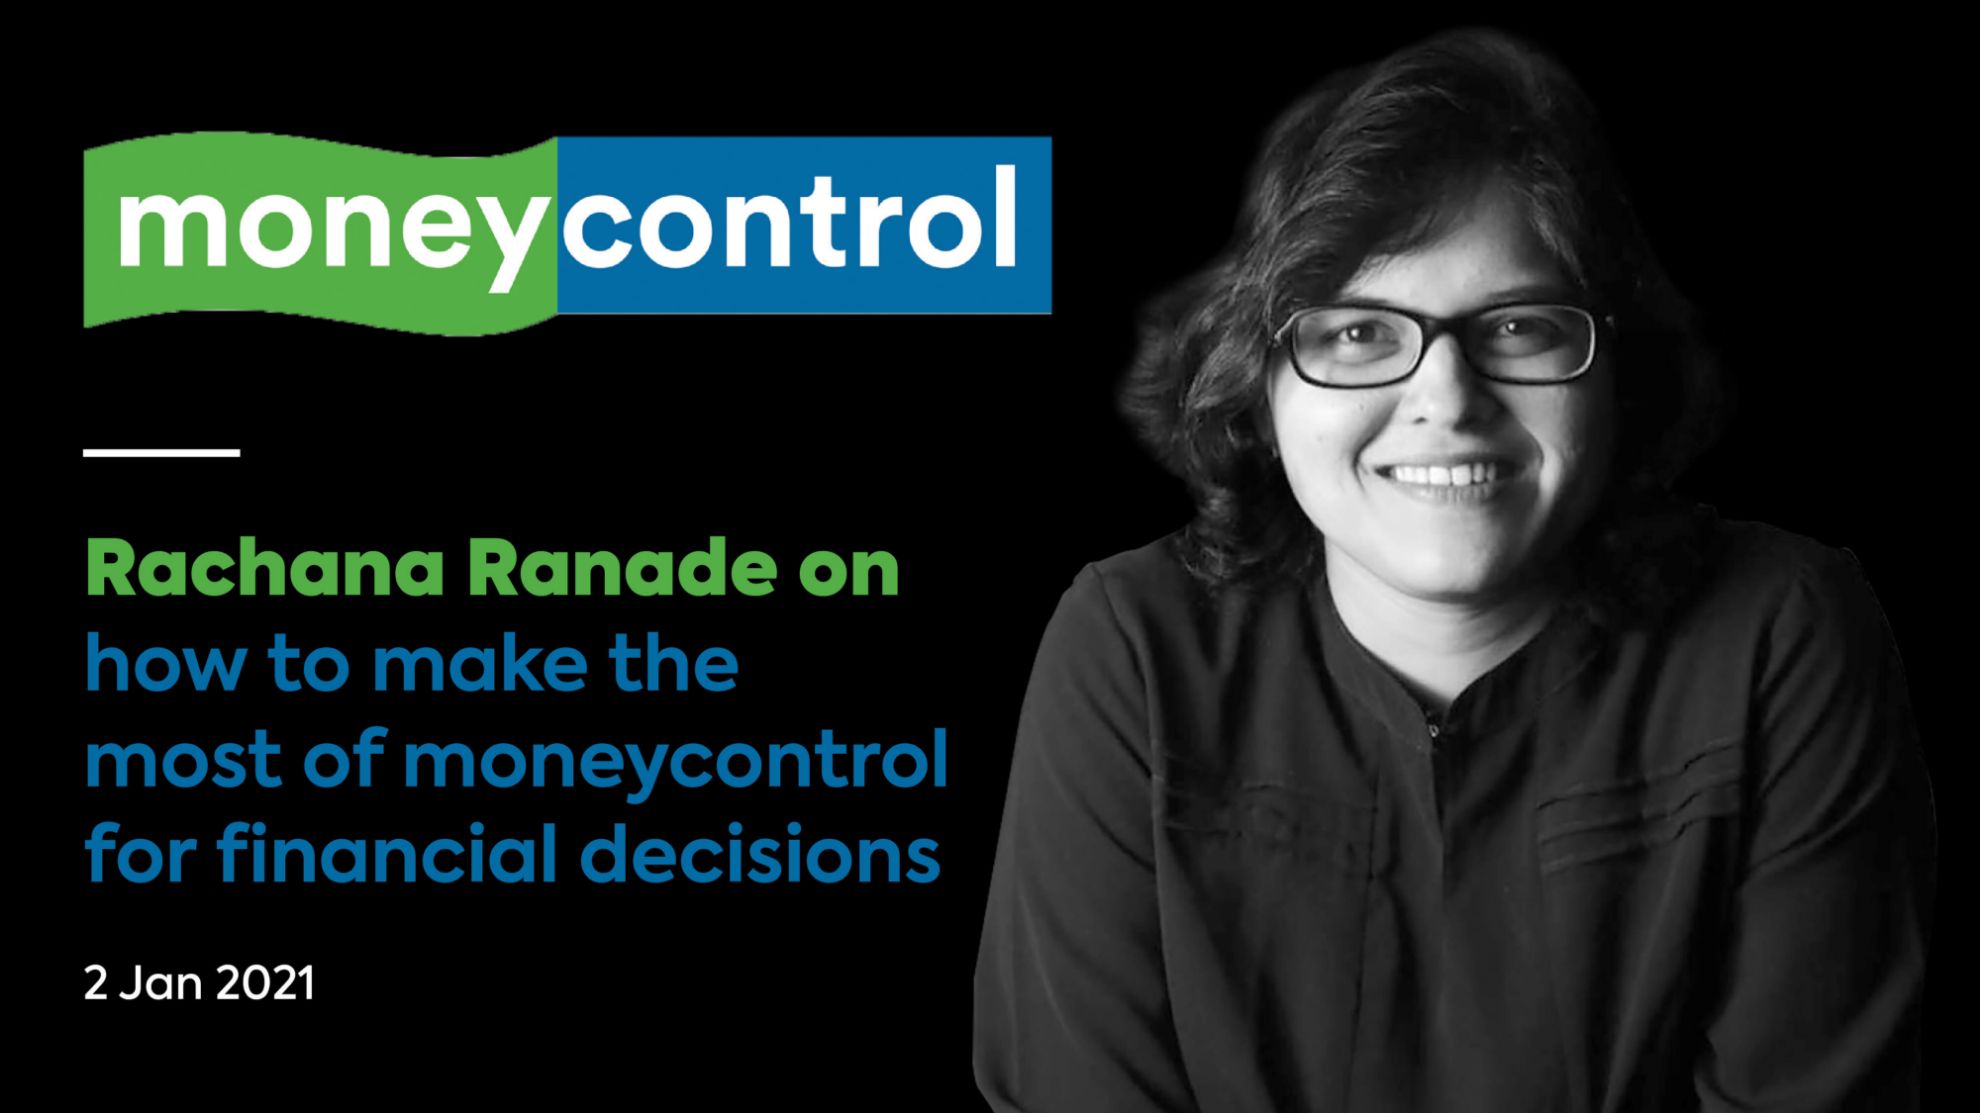 Rachana Ranade on  how to make the most of moneycontrol for financial decisions